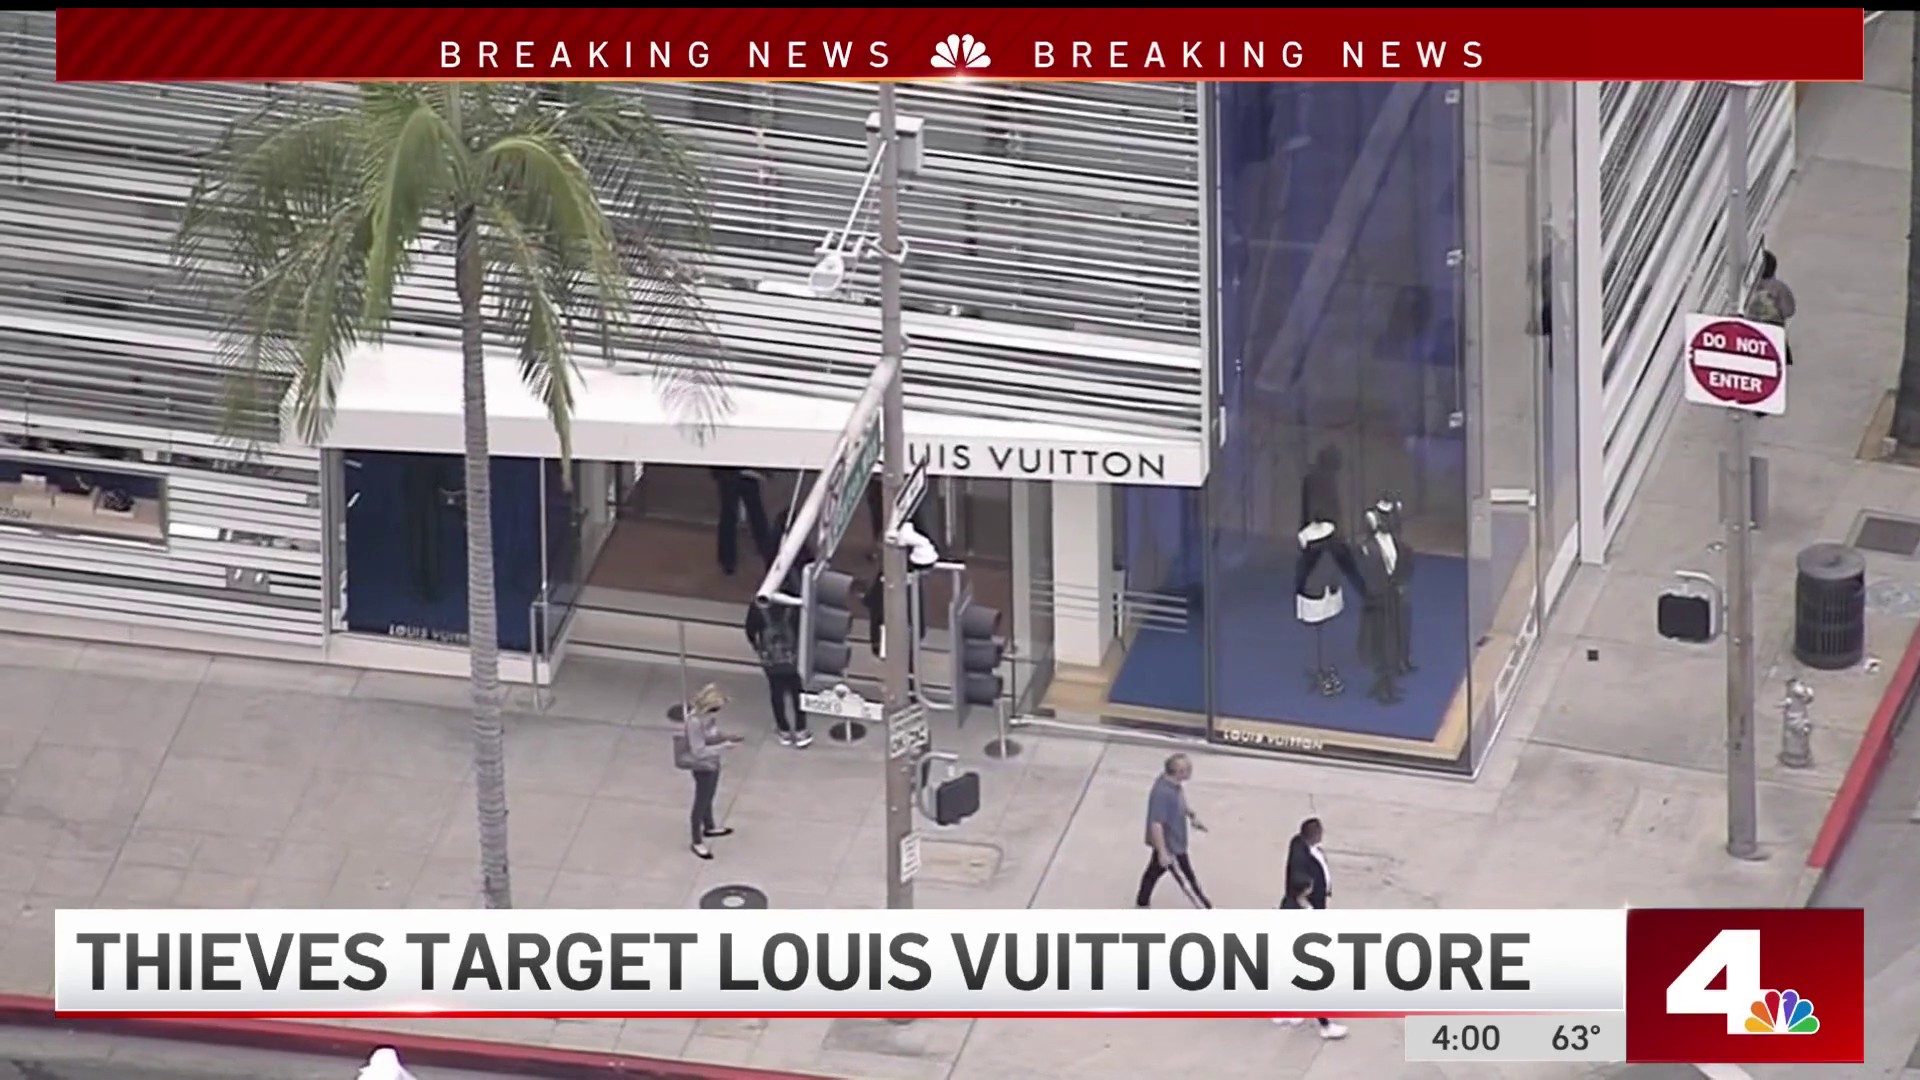 $100K Stolen From Moscow Louis Vuitton Store, Media Report - The